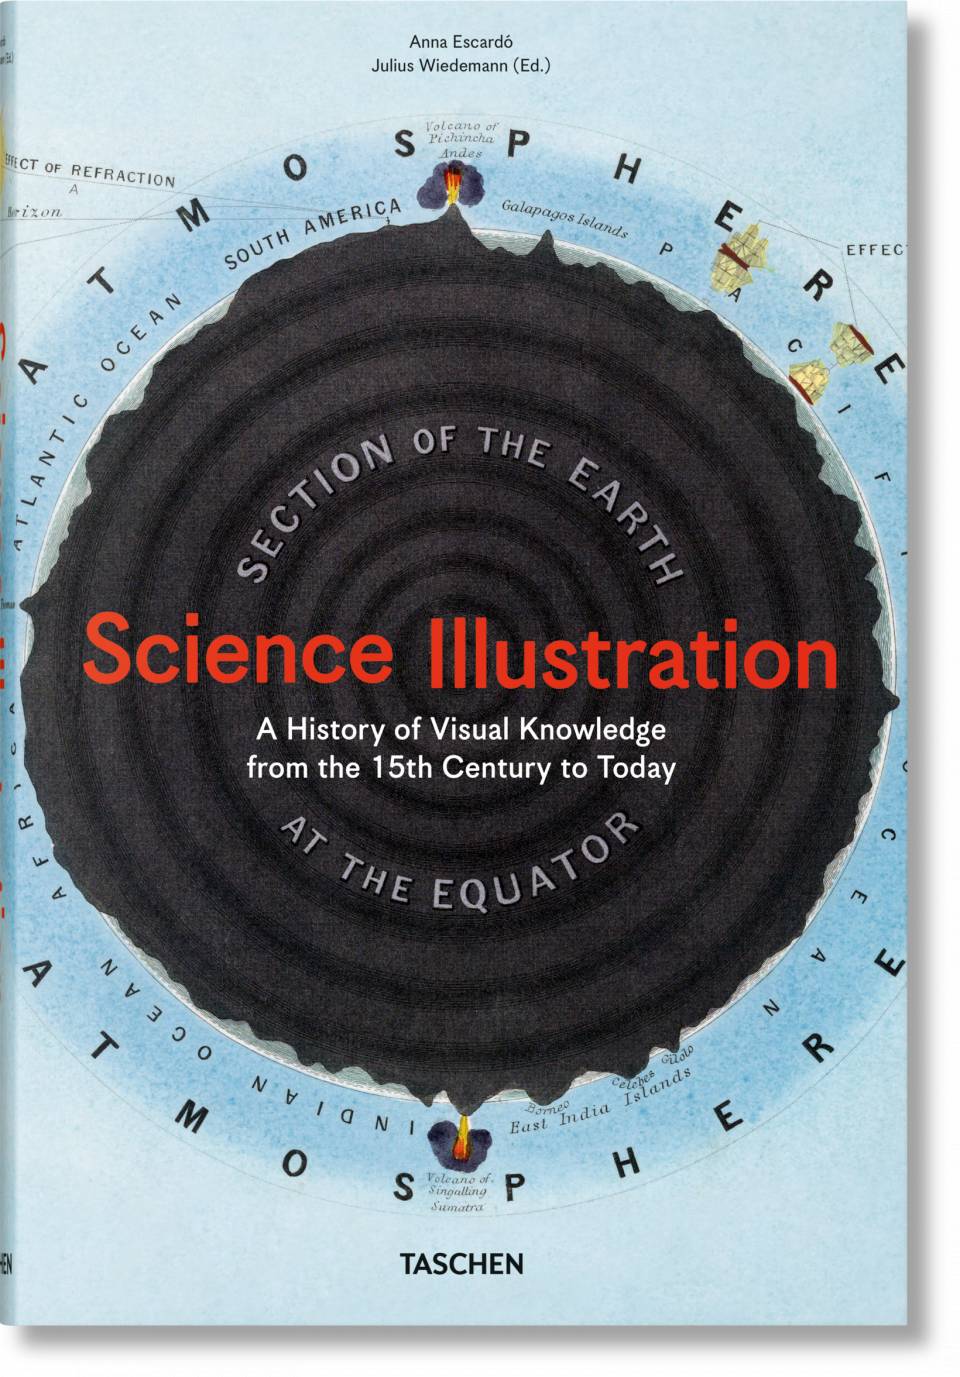 Science Illustration. A History of Visual Knowledge from the 15th Century to Today. PRE-ORDER